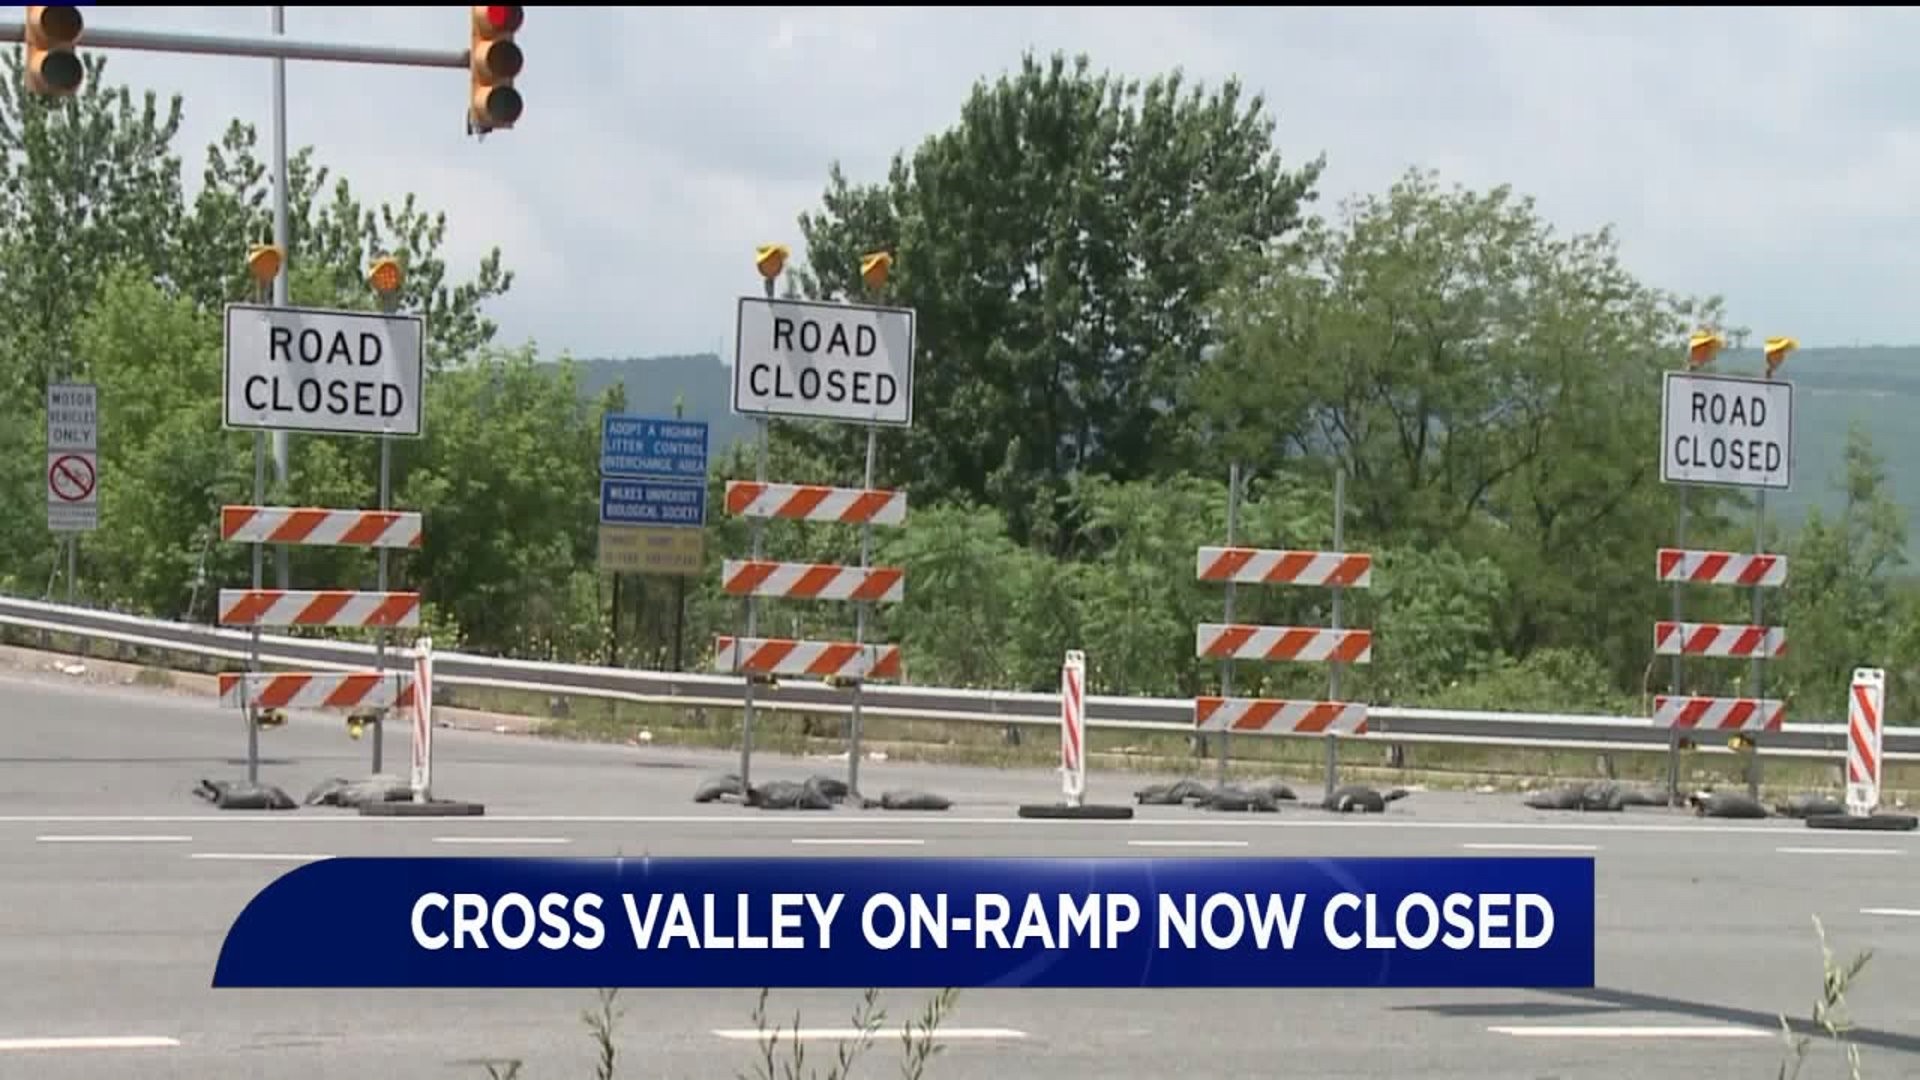 Cross Valley On-Ramp Closed Until 2019 in Plains Township